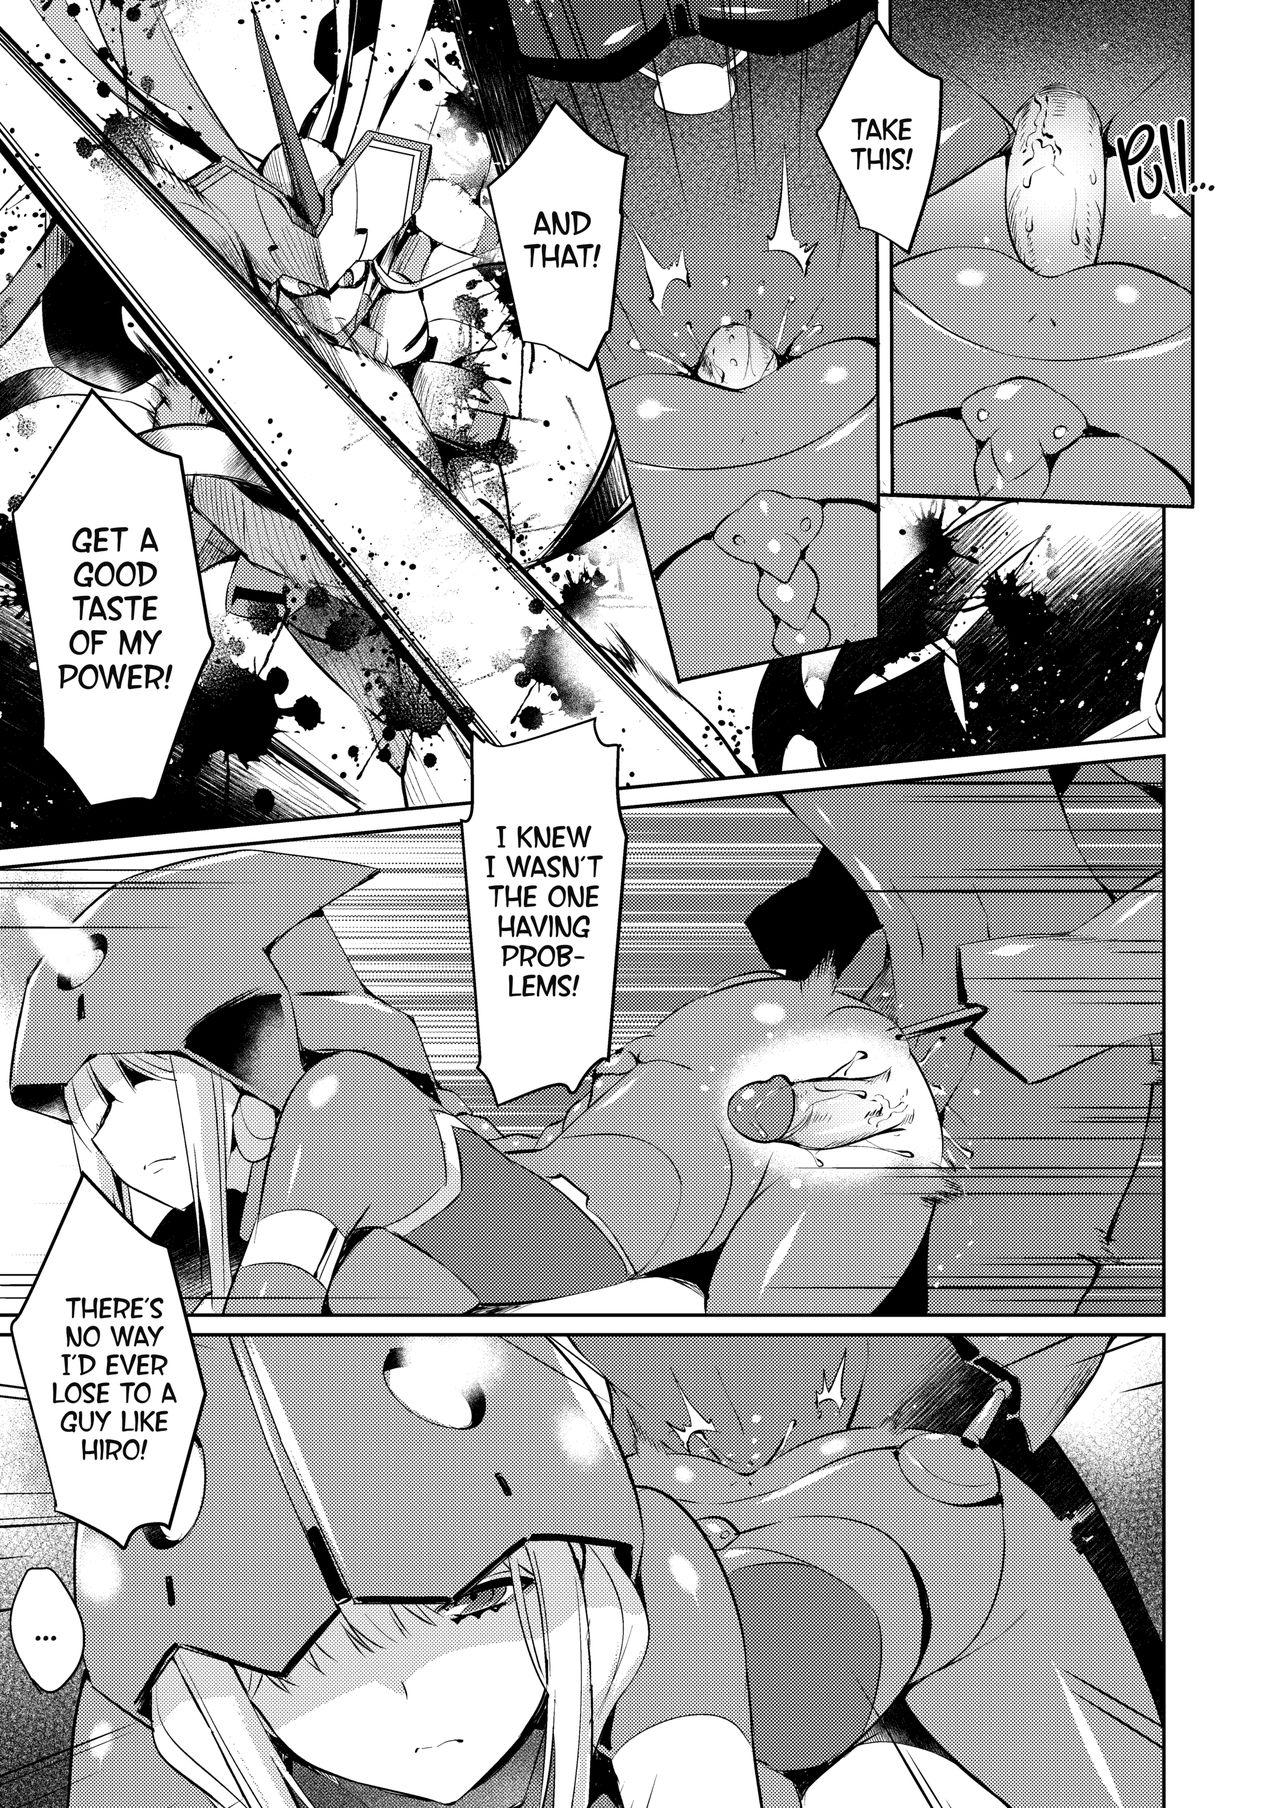 Crazy Mitsuru in the Zero Two - Darling in the franxx Hung - Page 8